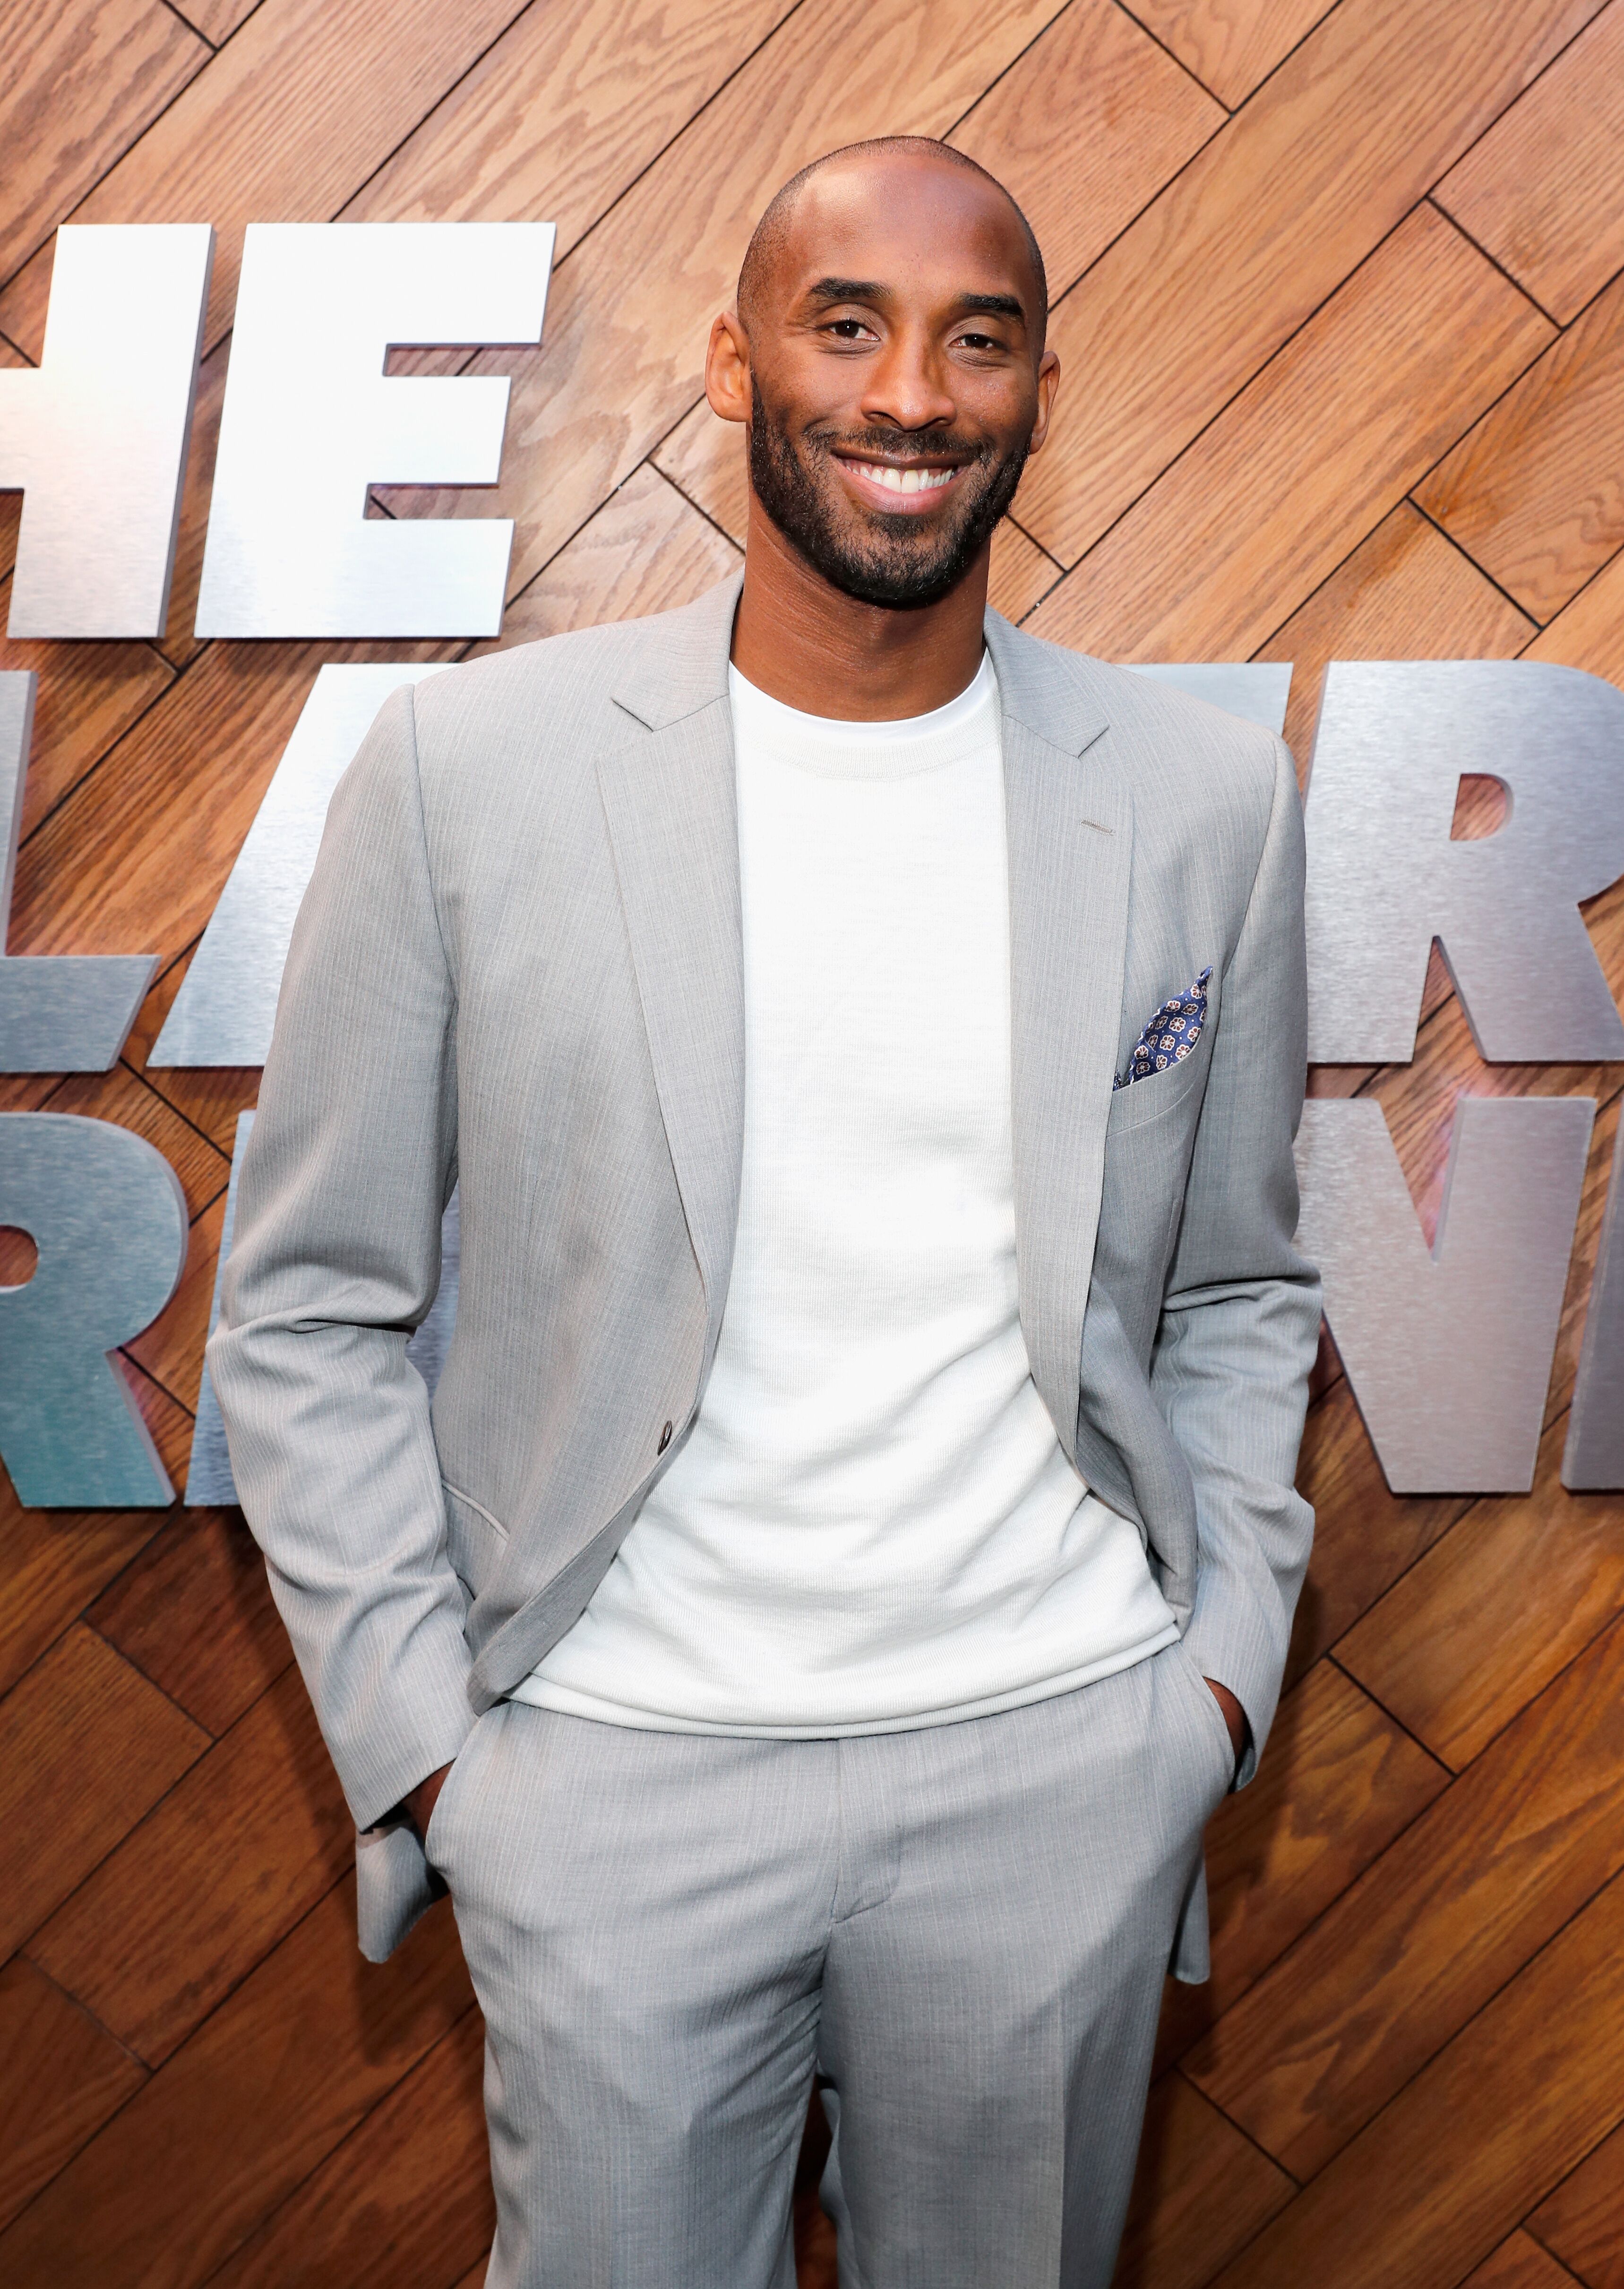  Kobe Bryant attends The Players' Tribune Summer Party. | Source: Getty Images